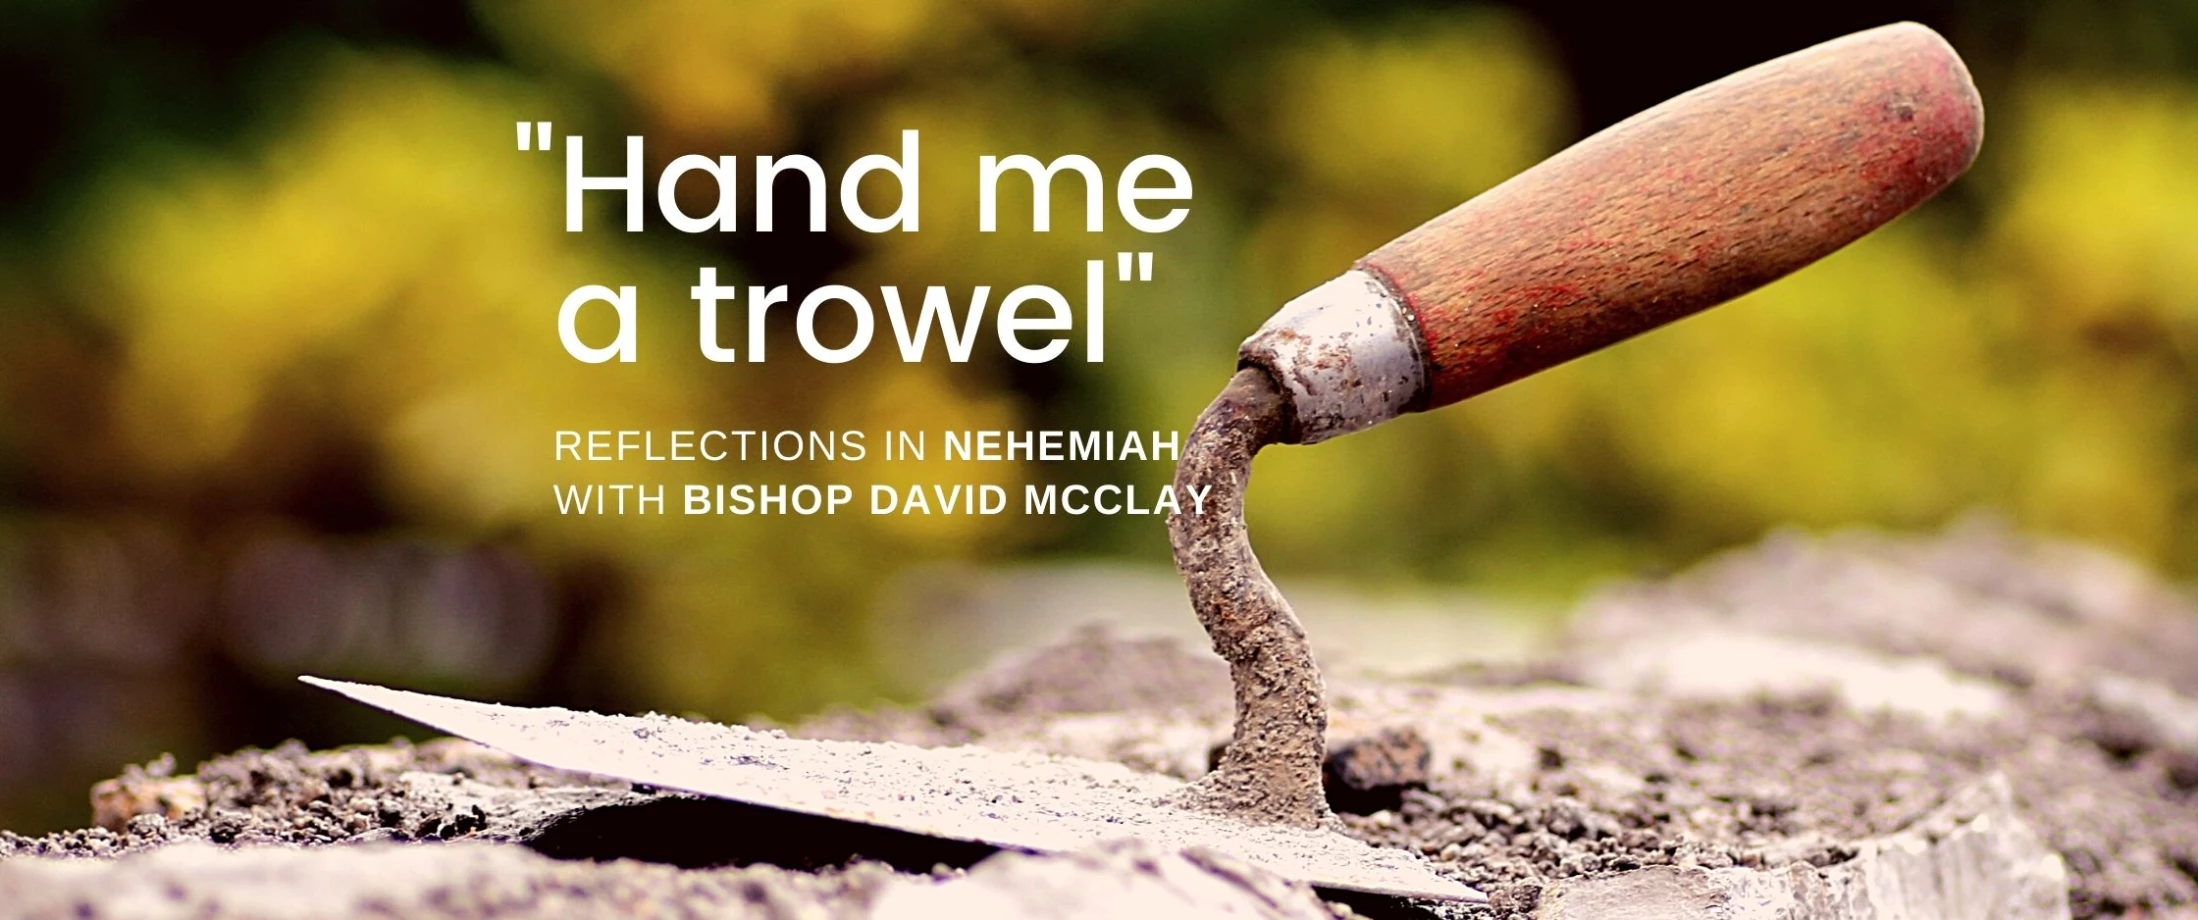 Reflections in Nehemiah for Lent Day 38